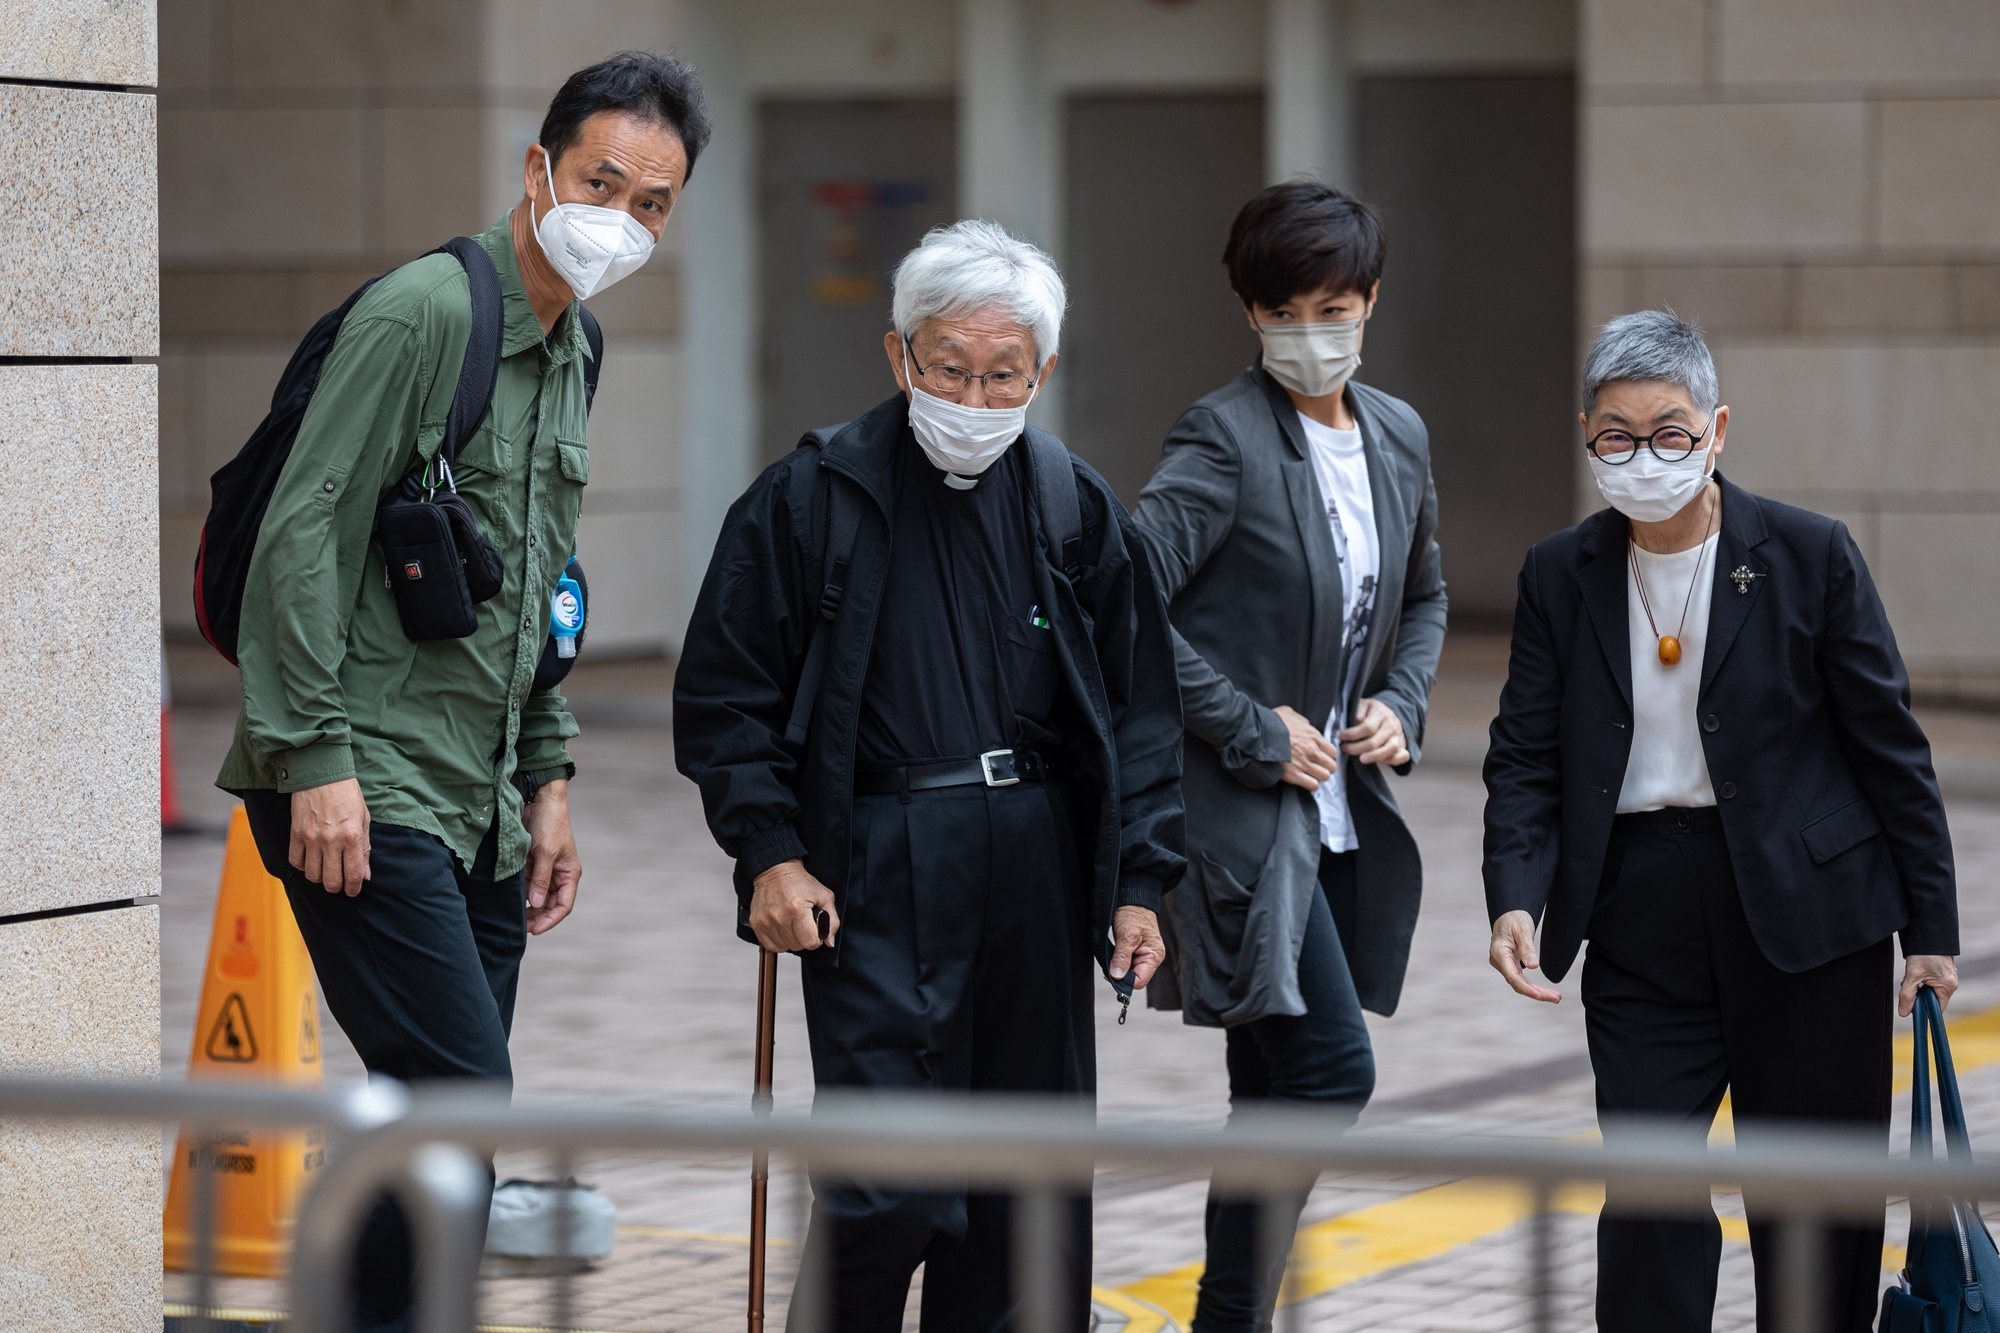 epa09970749 Scholar Hui Po-keung (L), Cardinal Joseph Zen (2-L), singer-activist Denise Ho (2-R), and prominent Hong Kong barrister Margaret Ng (R) arrive at the West Kowloon Magistrates&#039; Courts in Hong Kong, China, 24 May 2022. The four pro-democracy activists are on bail following their arrests by national security police after being accused of conspiring to collude with foreign powers in relation to a relief fund set up to providing legal assistance, medical treatment and emergency relief for protesters during the 2019 anti-extradition unrest.  EPA/JEROME FAVRE